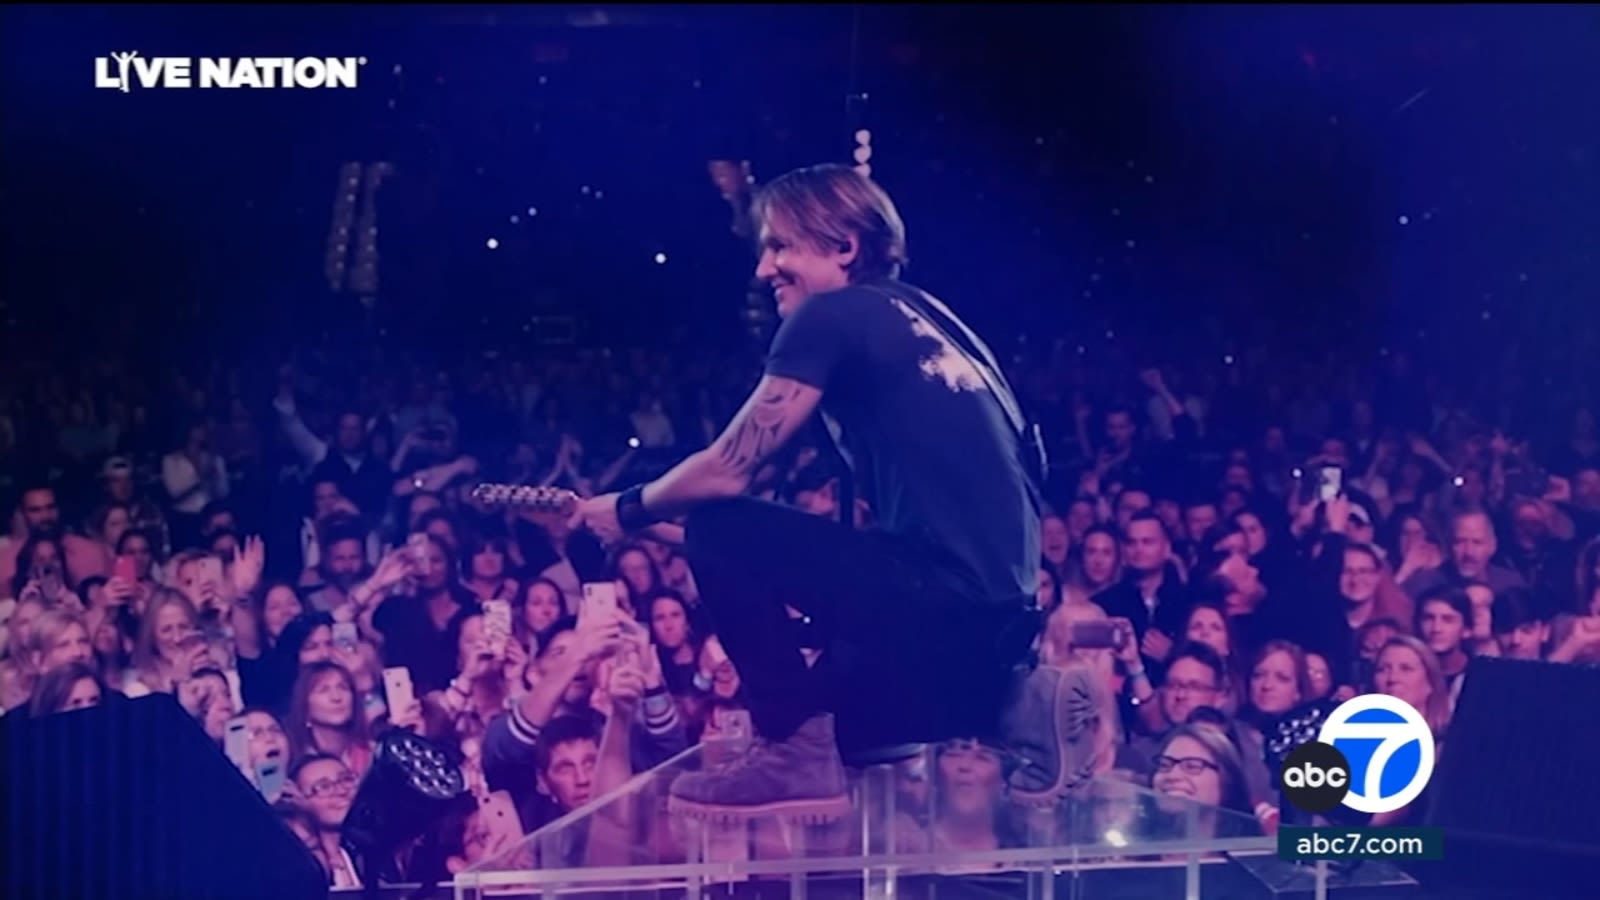 Music Superstar Keith Urban bringing his country sound to Las Vegas residency at Fountainebleau